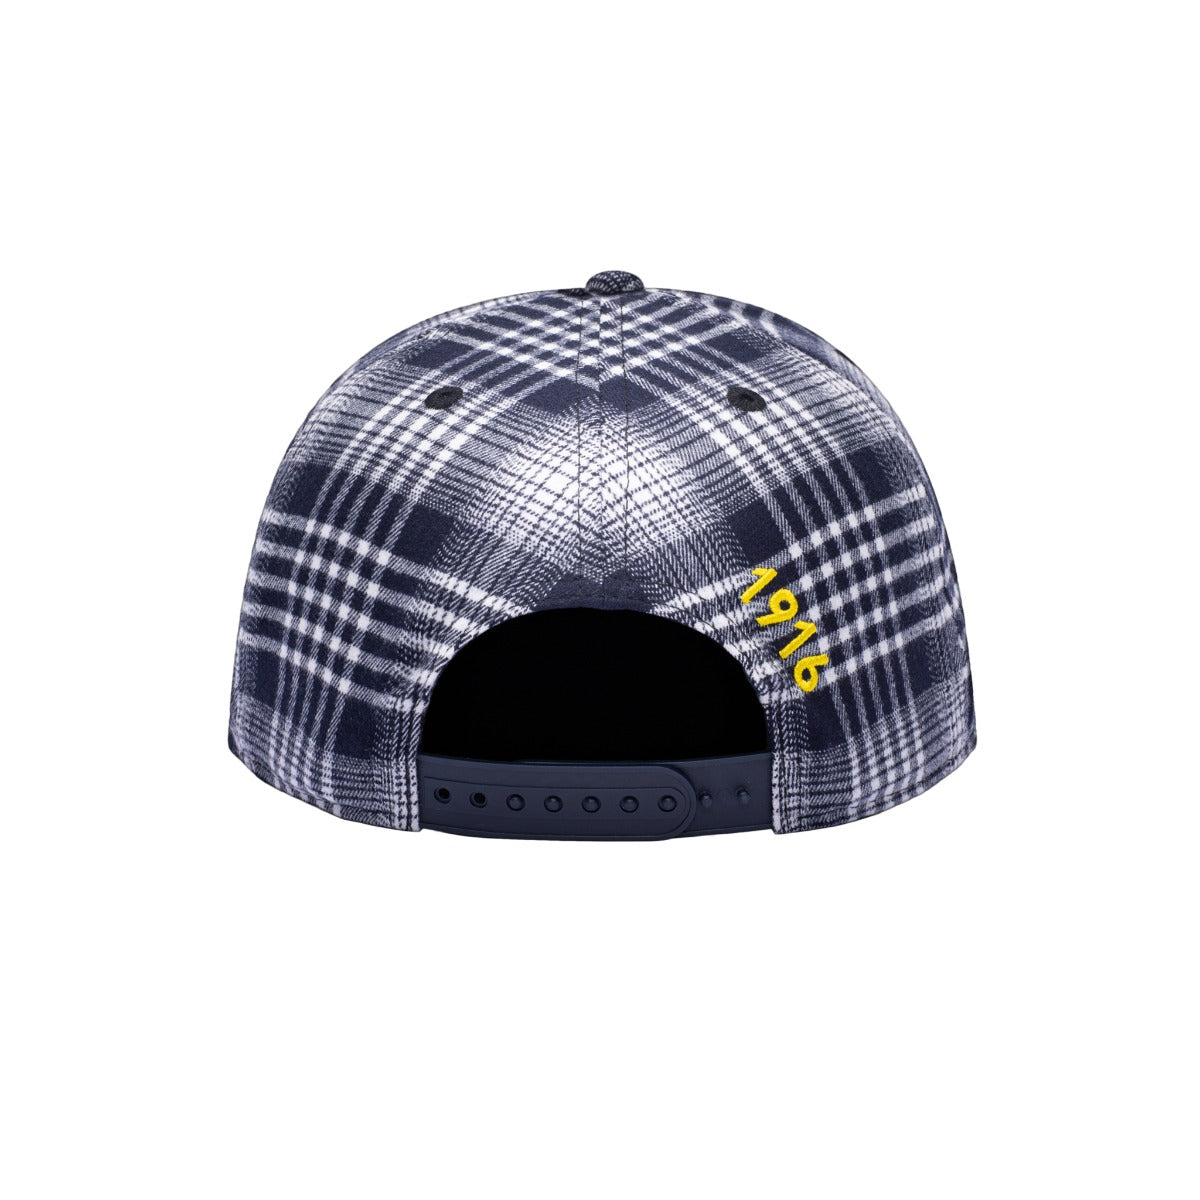 FI Collection Club America Hooligan Hat - Navy-White (Back)